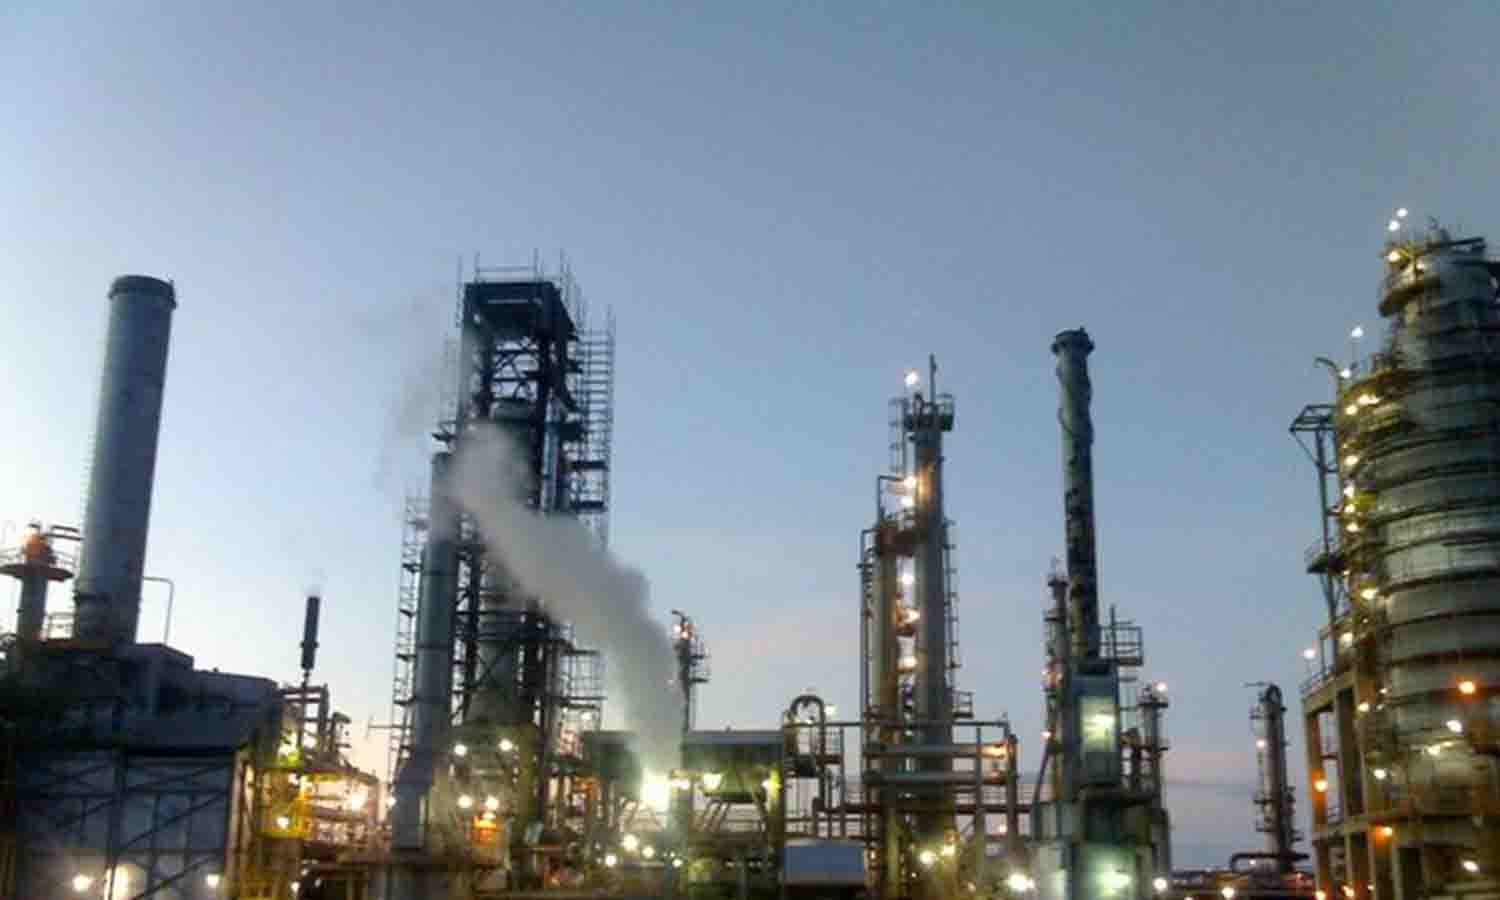 The Iranian company Naftiran signed an agreement with Venezuela to recover and activate the El Palito refinery in order to produce 146,000 barrels per day